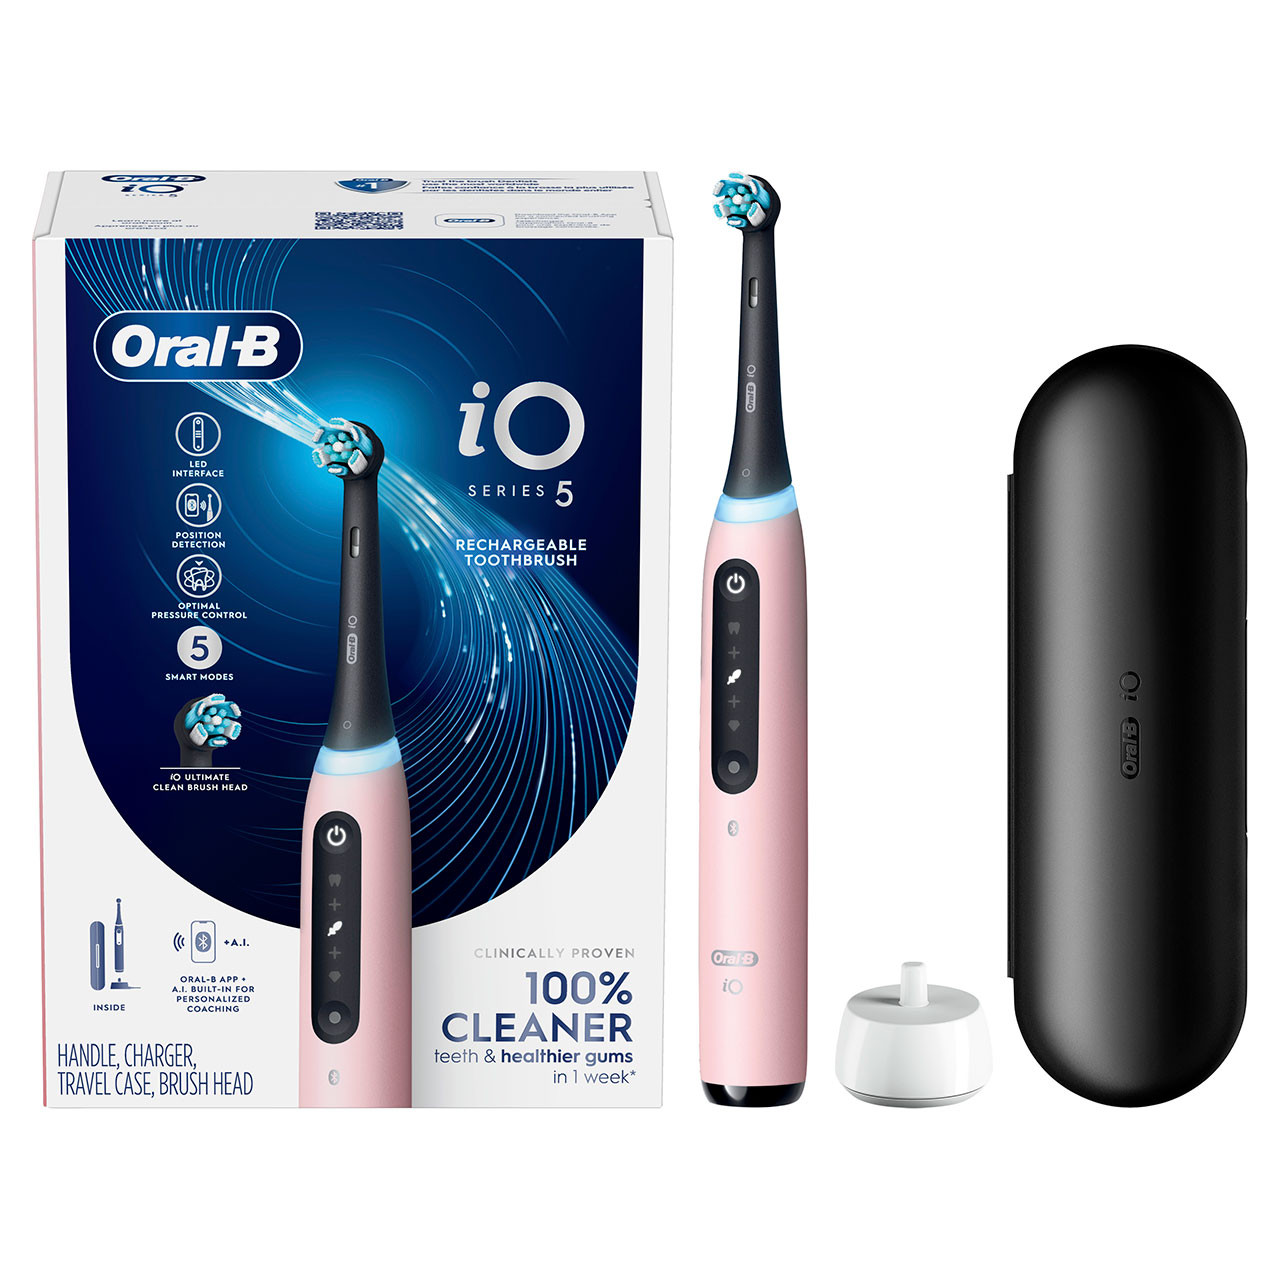 iO Series 4 Rechargeable Toothbrush - Oral-B